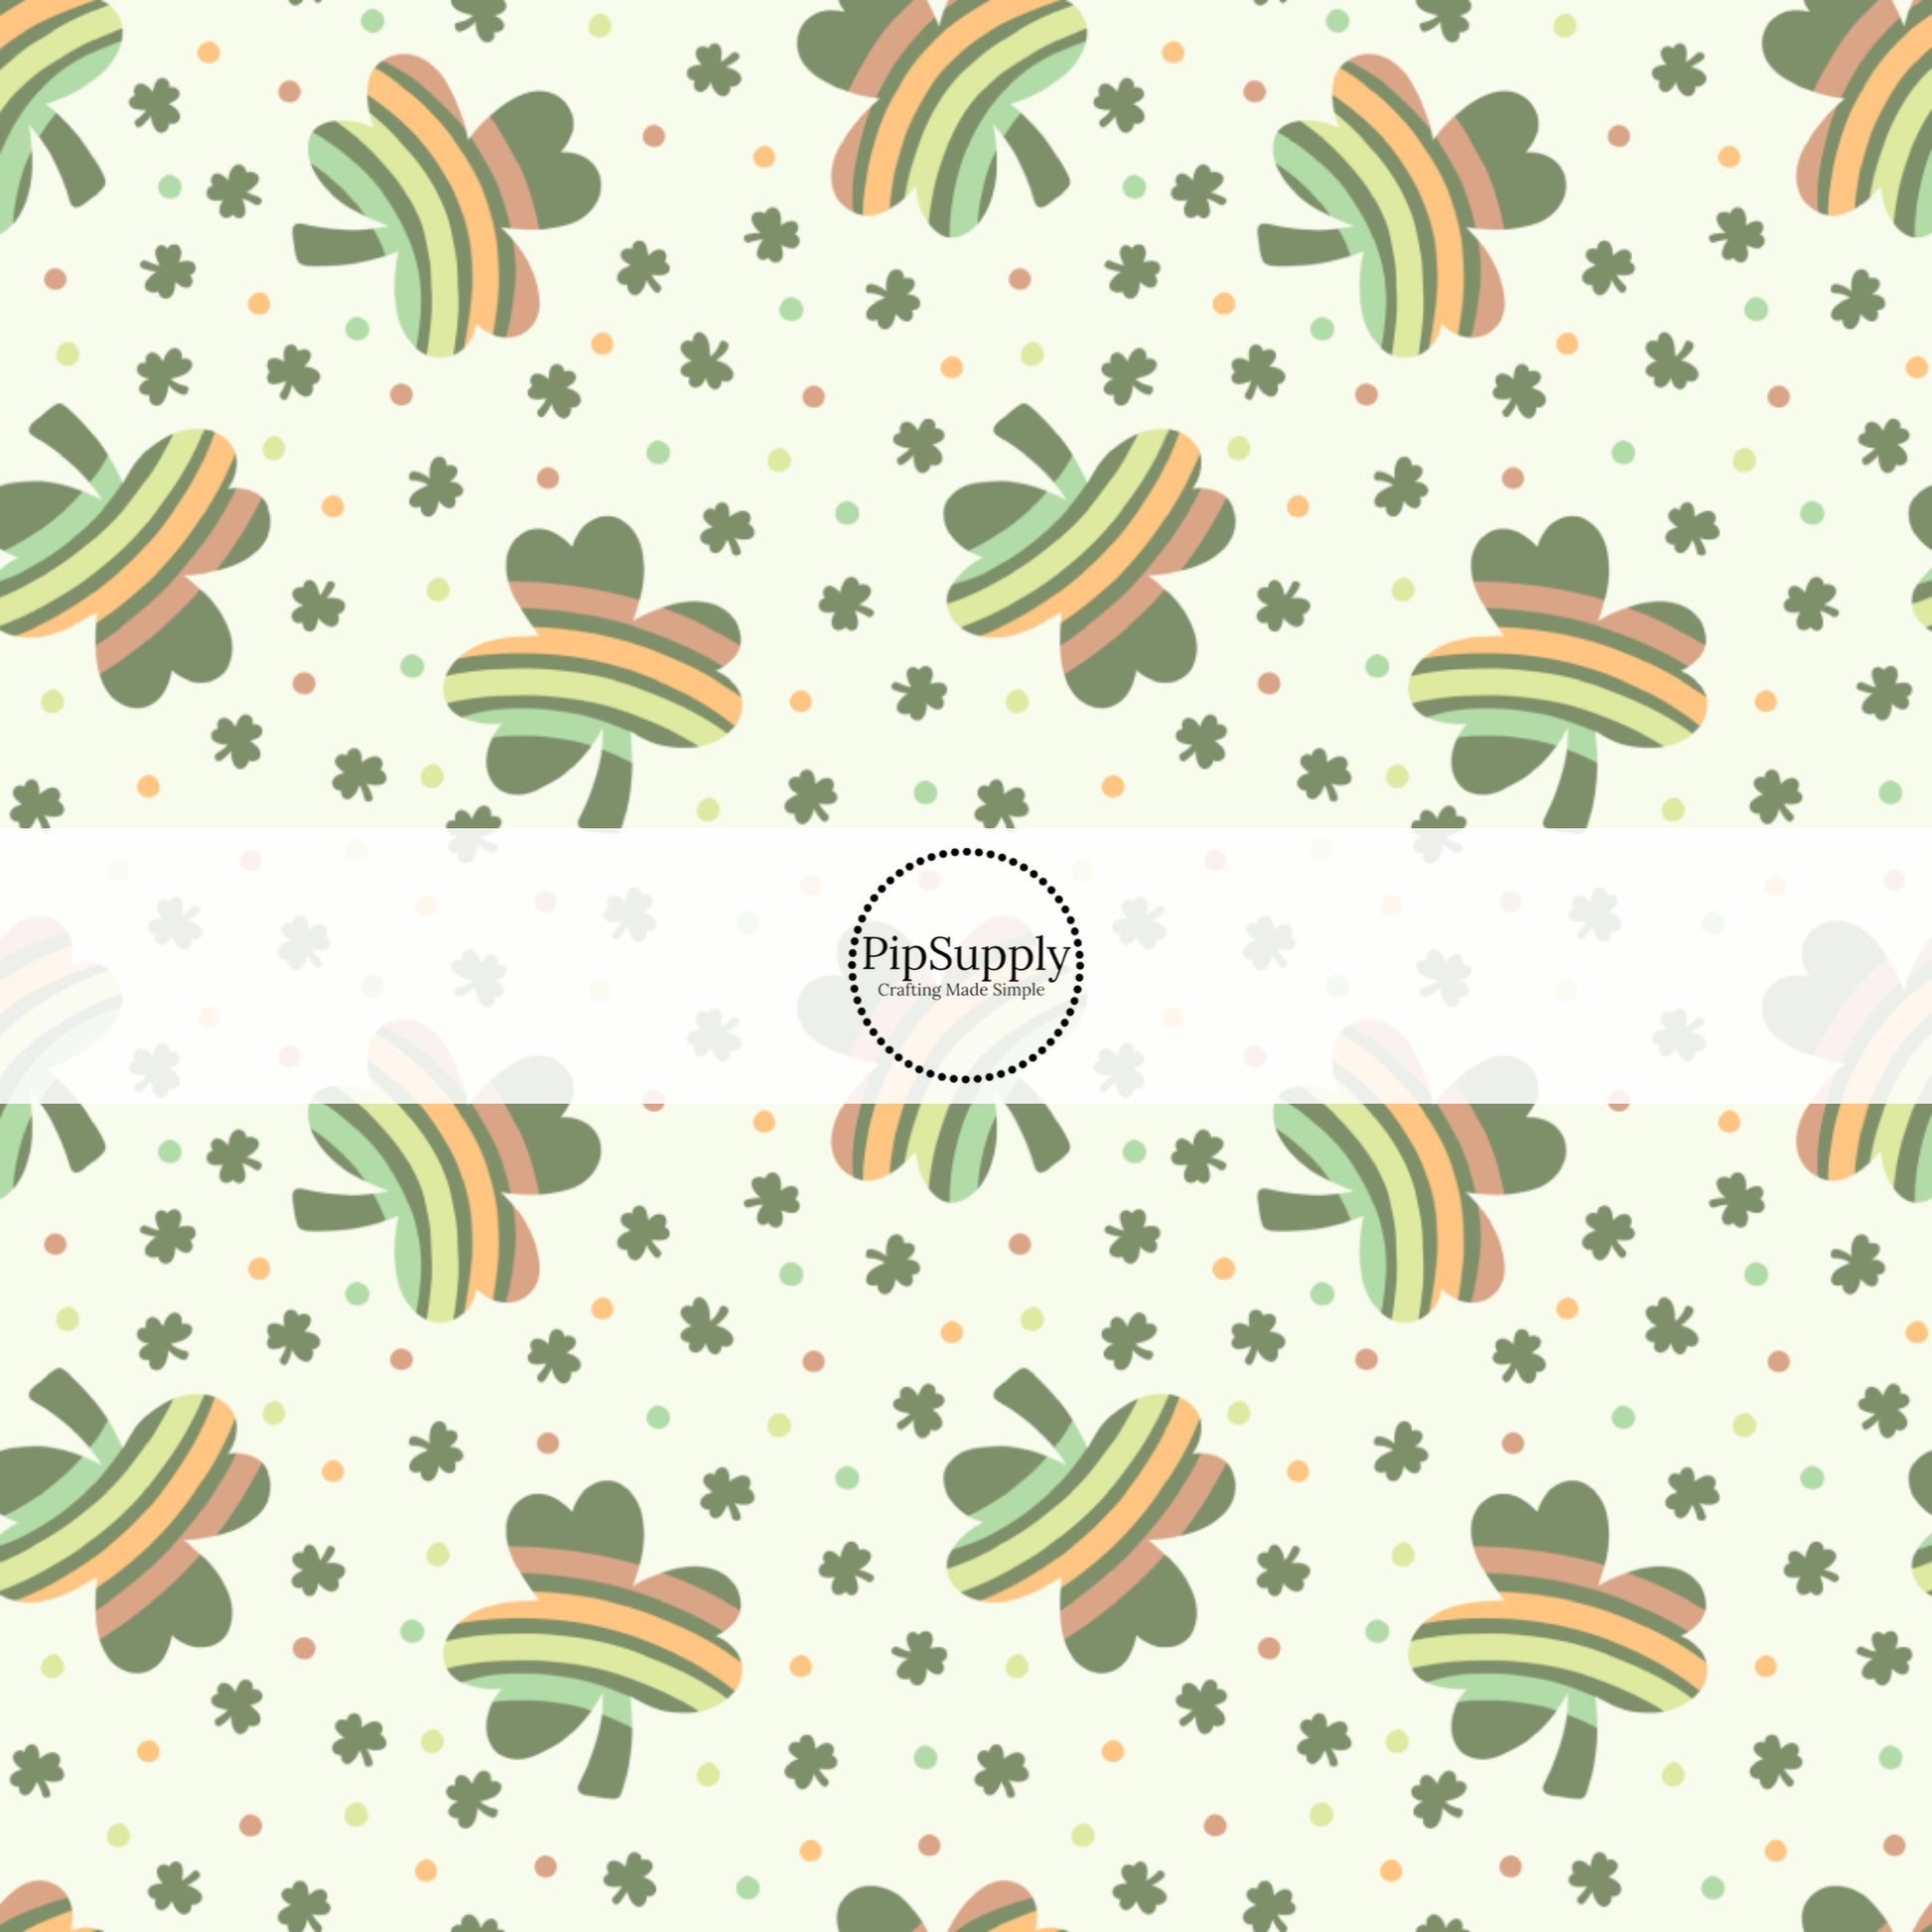 Green Clovers and Rainbows on Cream Fabric by the Yard.